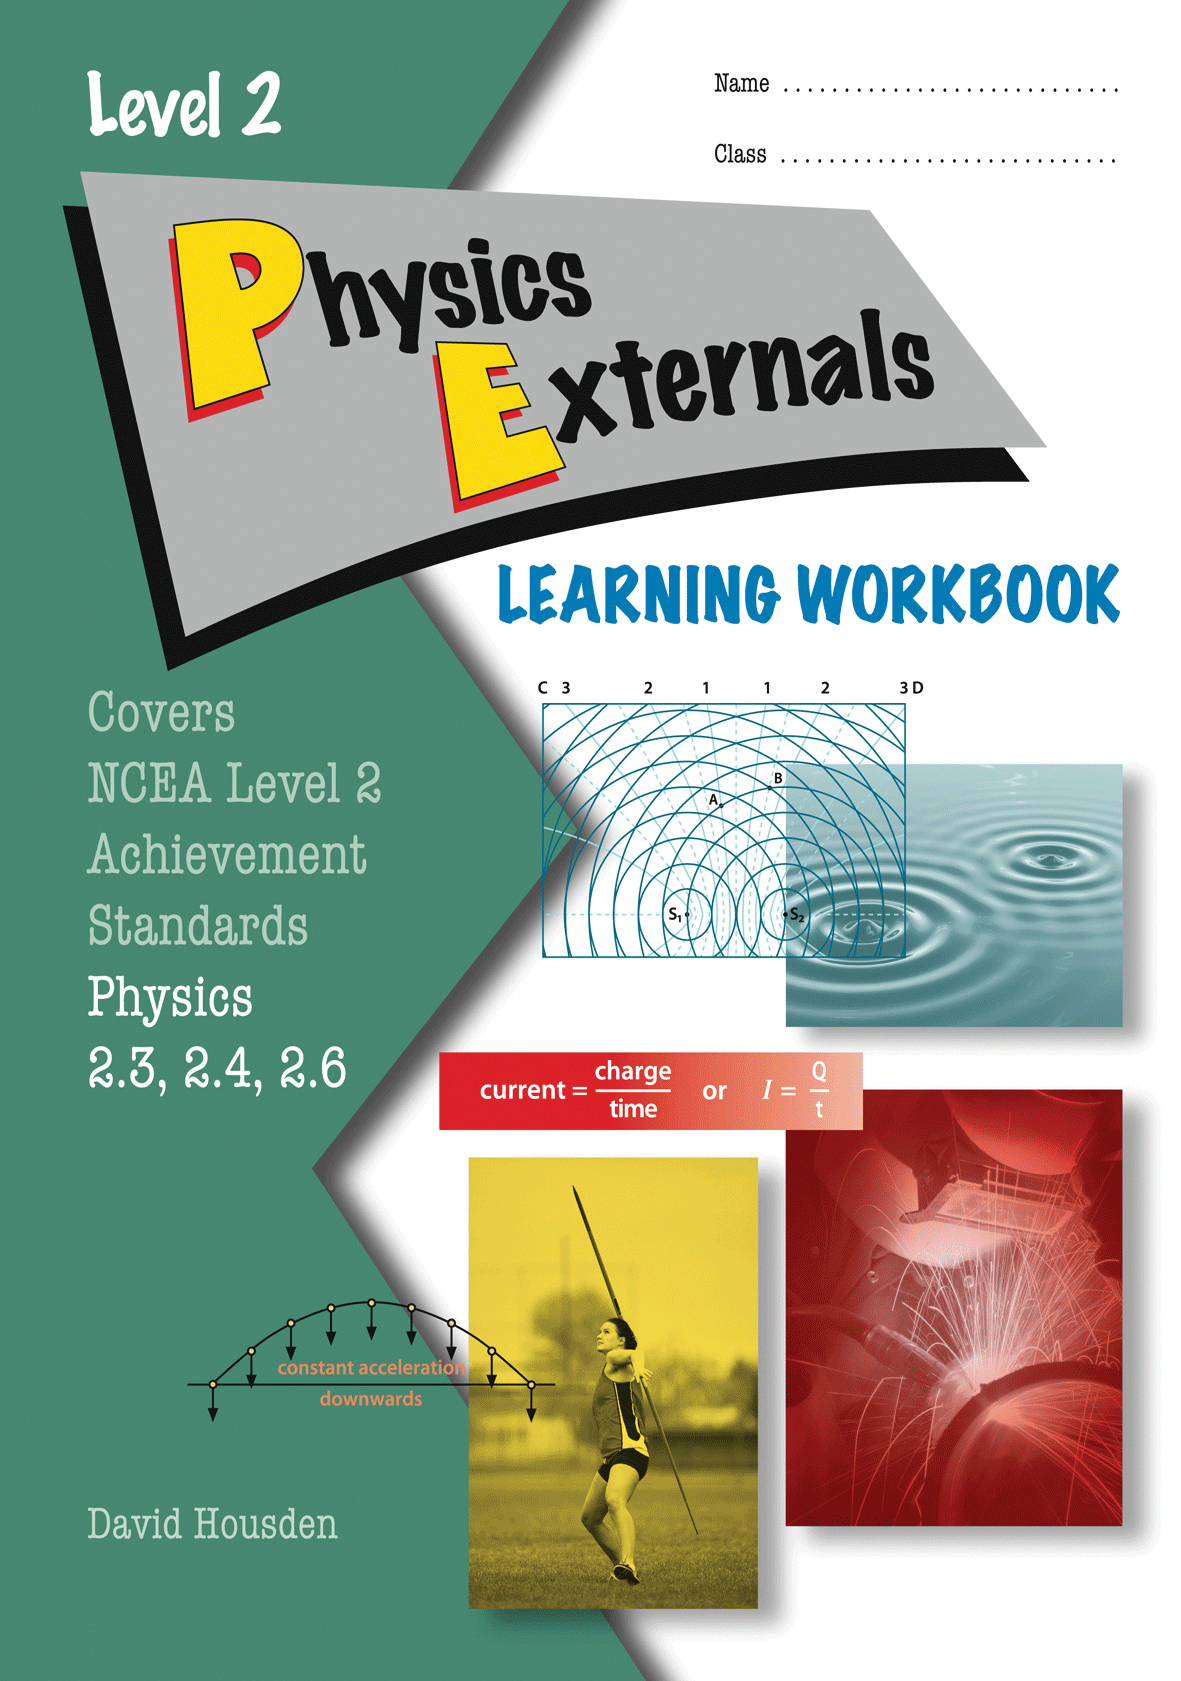 Level 2 Physics Externals Learning Workbook